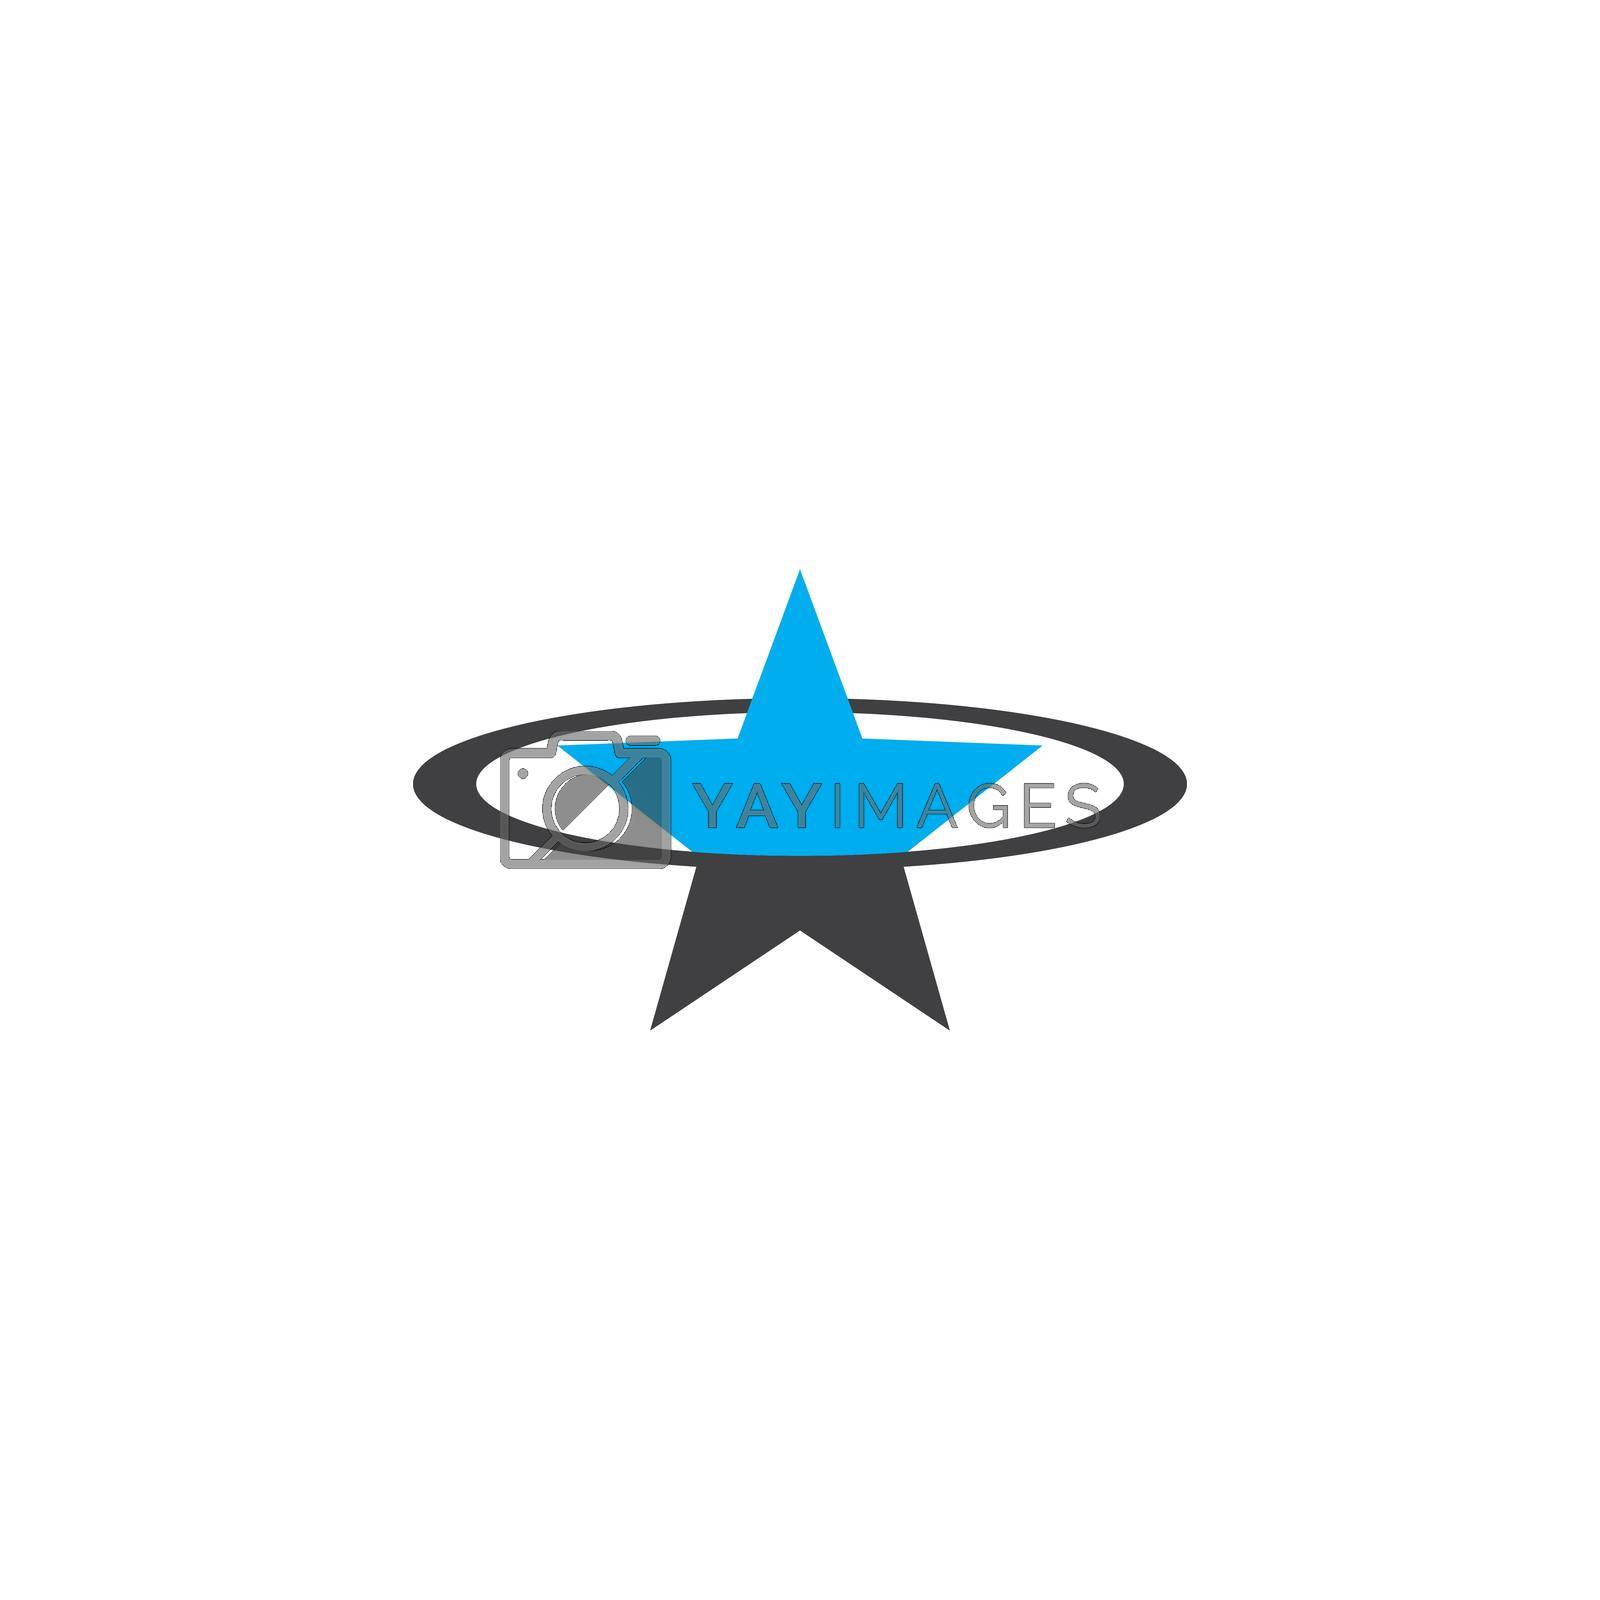 Royalty free image of star logo vector  by awk